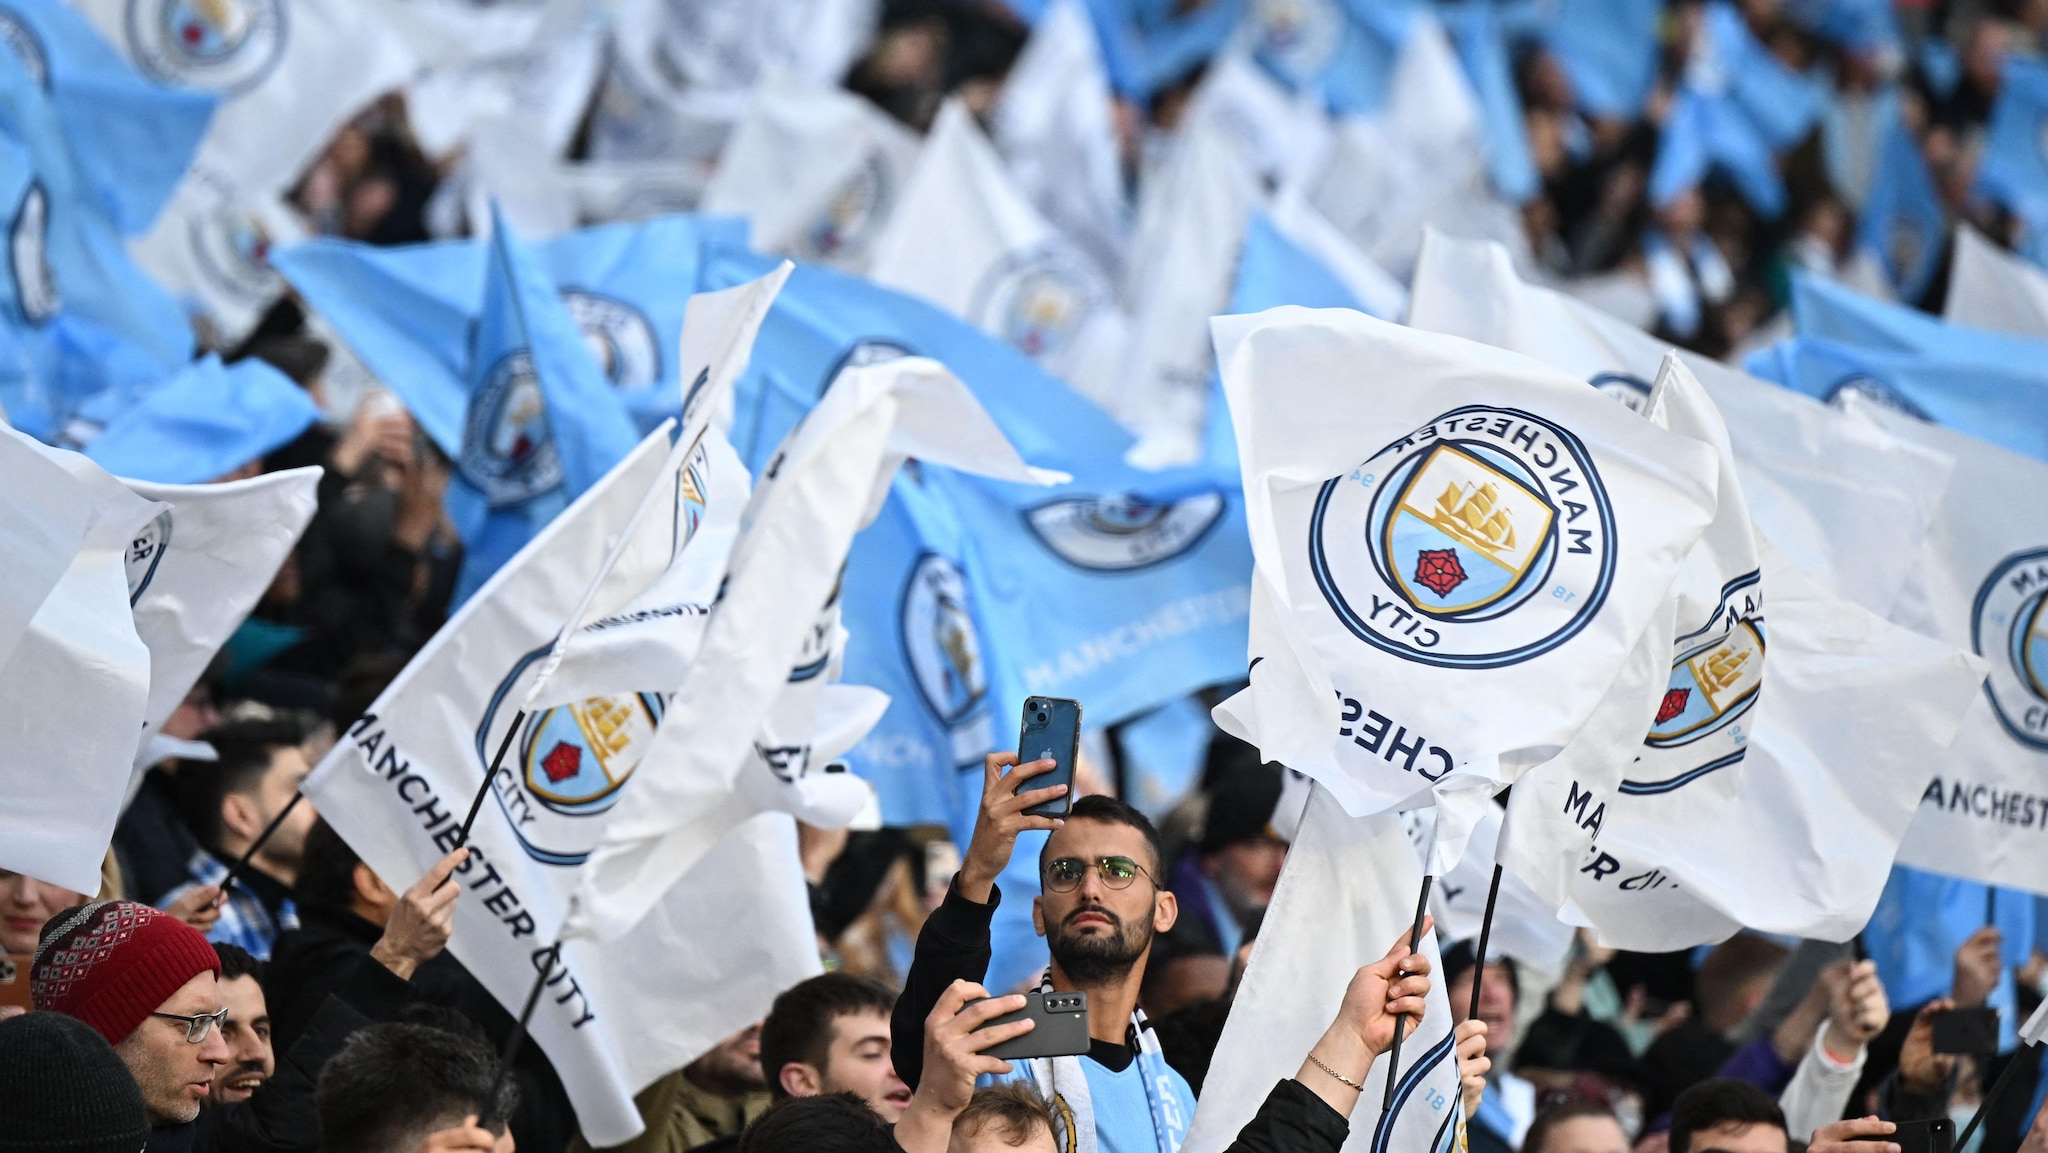 How a CITY fan plans to make every match a banner day